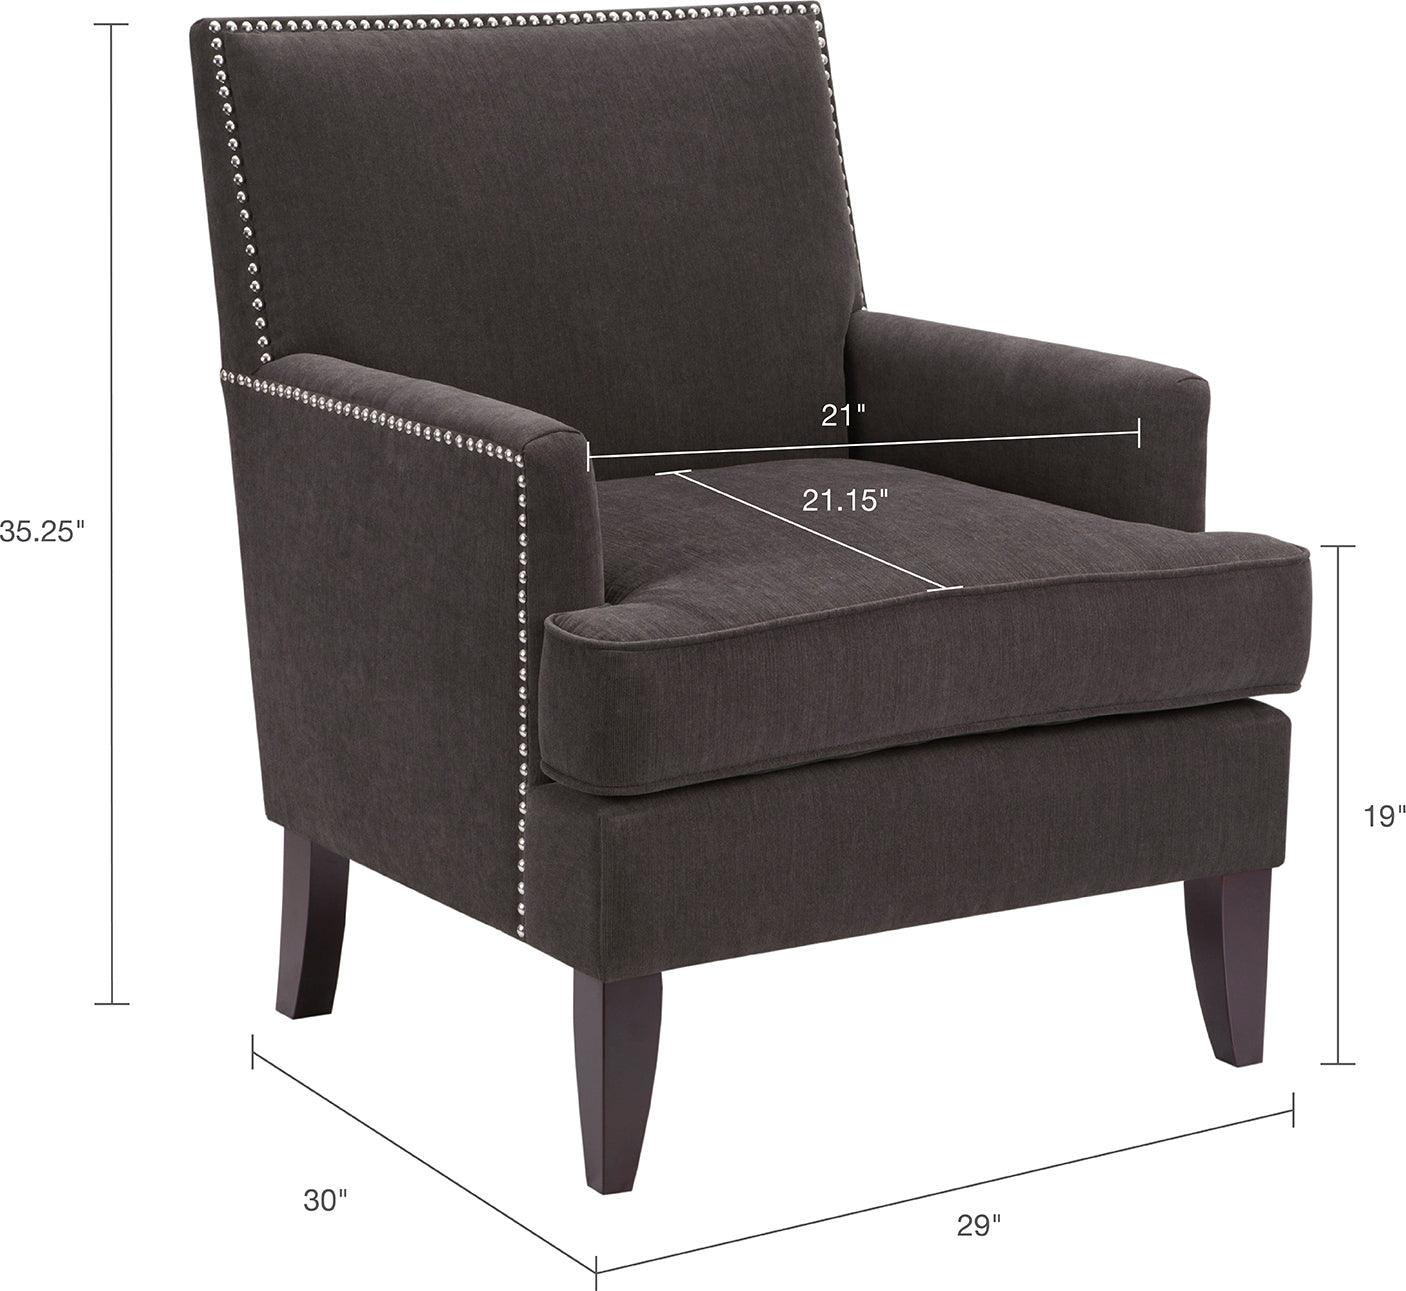 Olliix.com Accent Chairs - Colton Track Arm Club Chair Charcoal